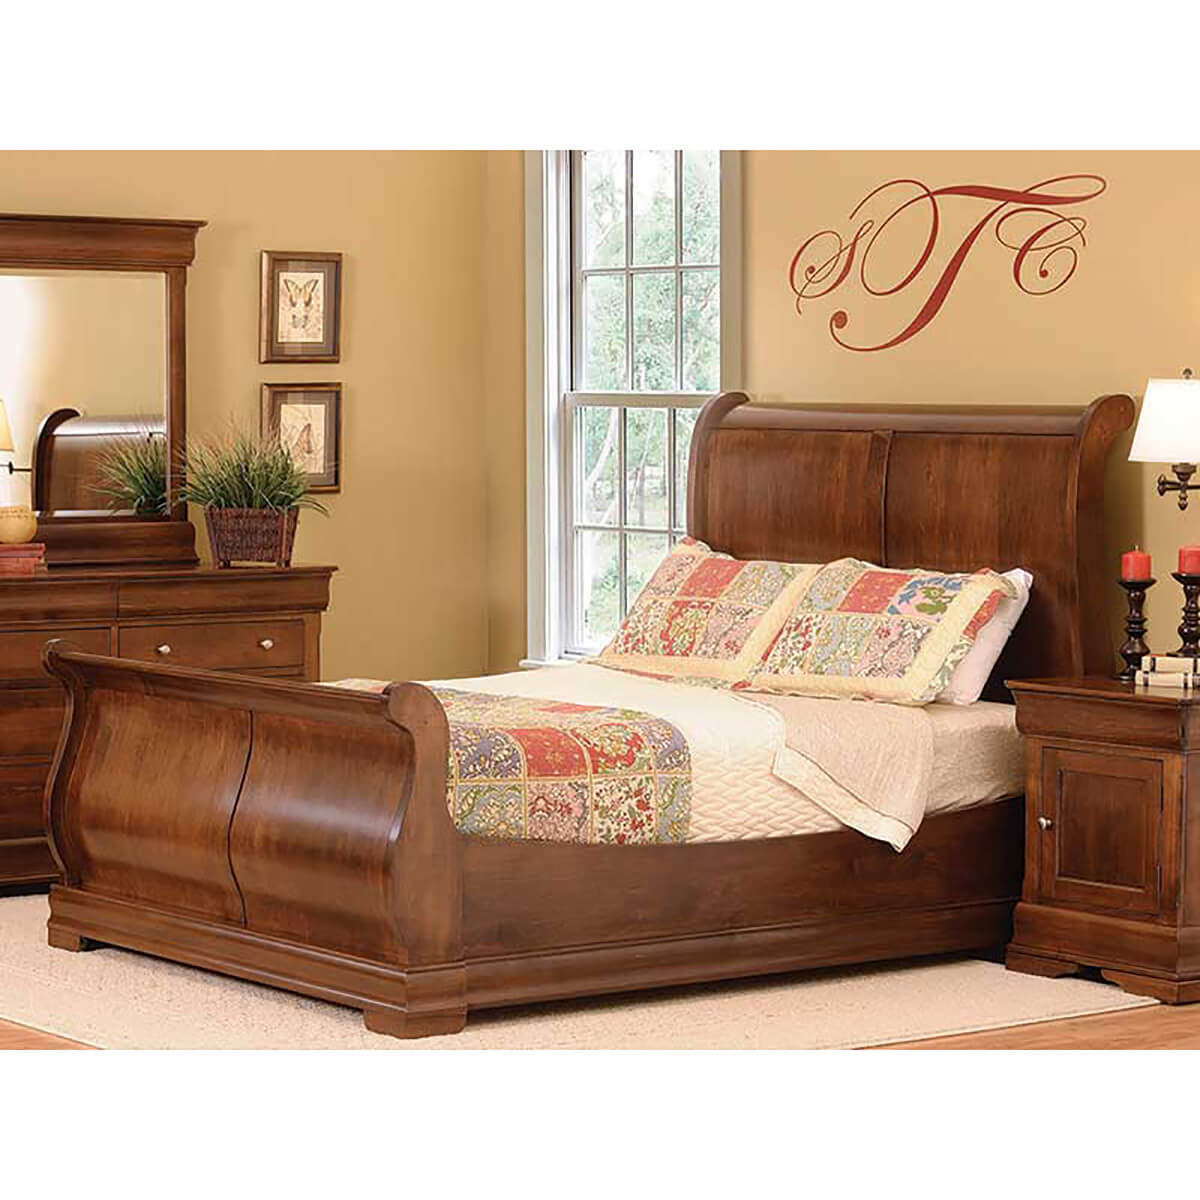 Read more about the article Flora Bedroom Collection